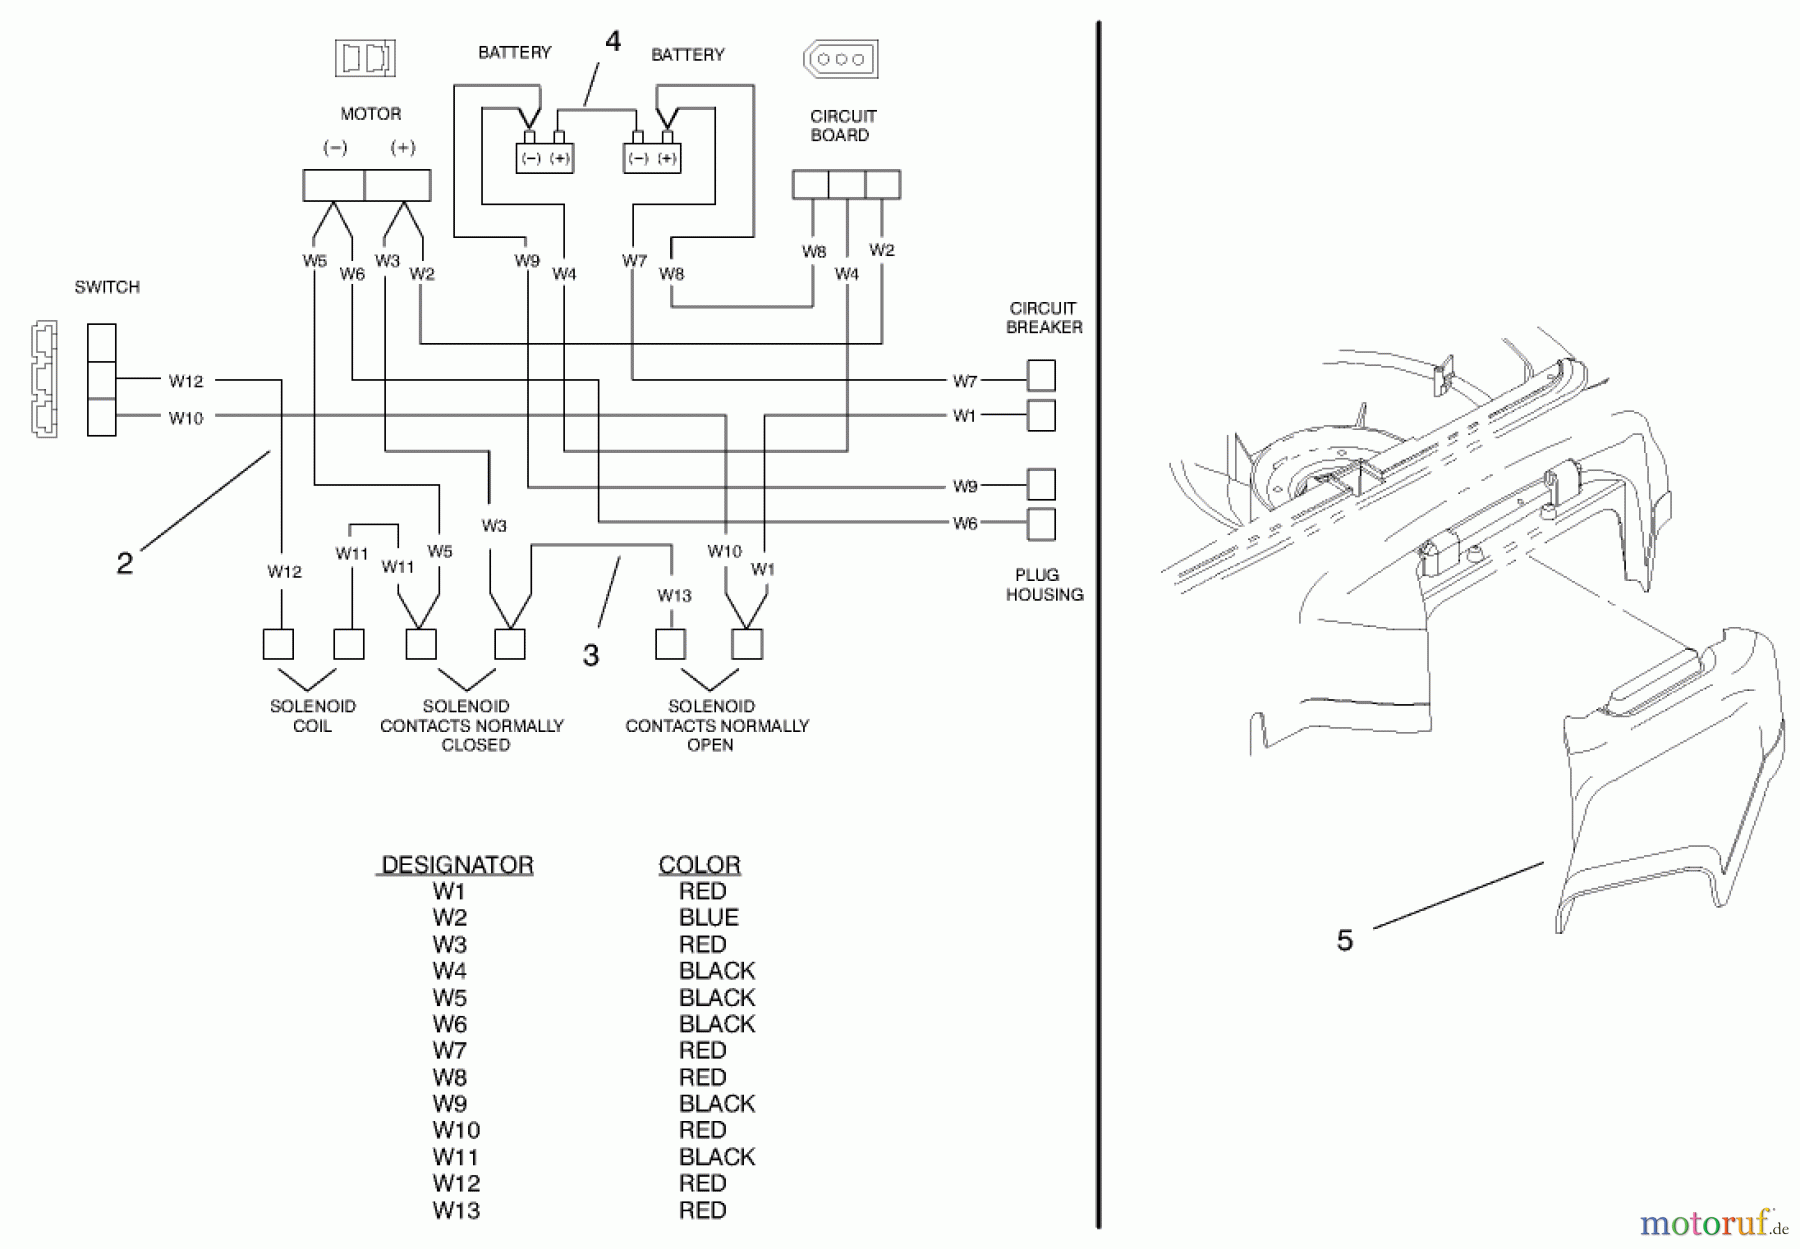  Toro Neu Mowers, Electric 20647 - Toro Carefree Electric WPM, 24 VDC, 1996 (6900001-6999999) ELECTRICAL WIRE DIAGRAM AND SIDE DISCHARGE CHUTE